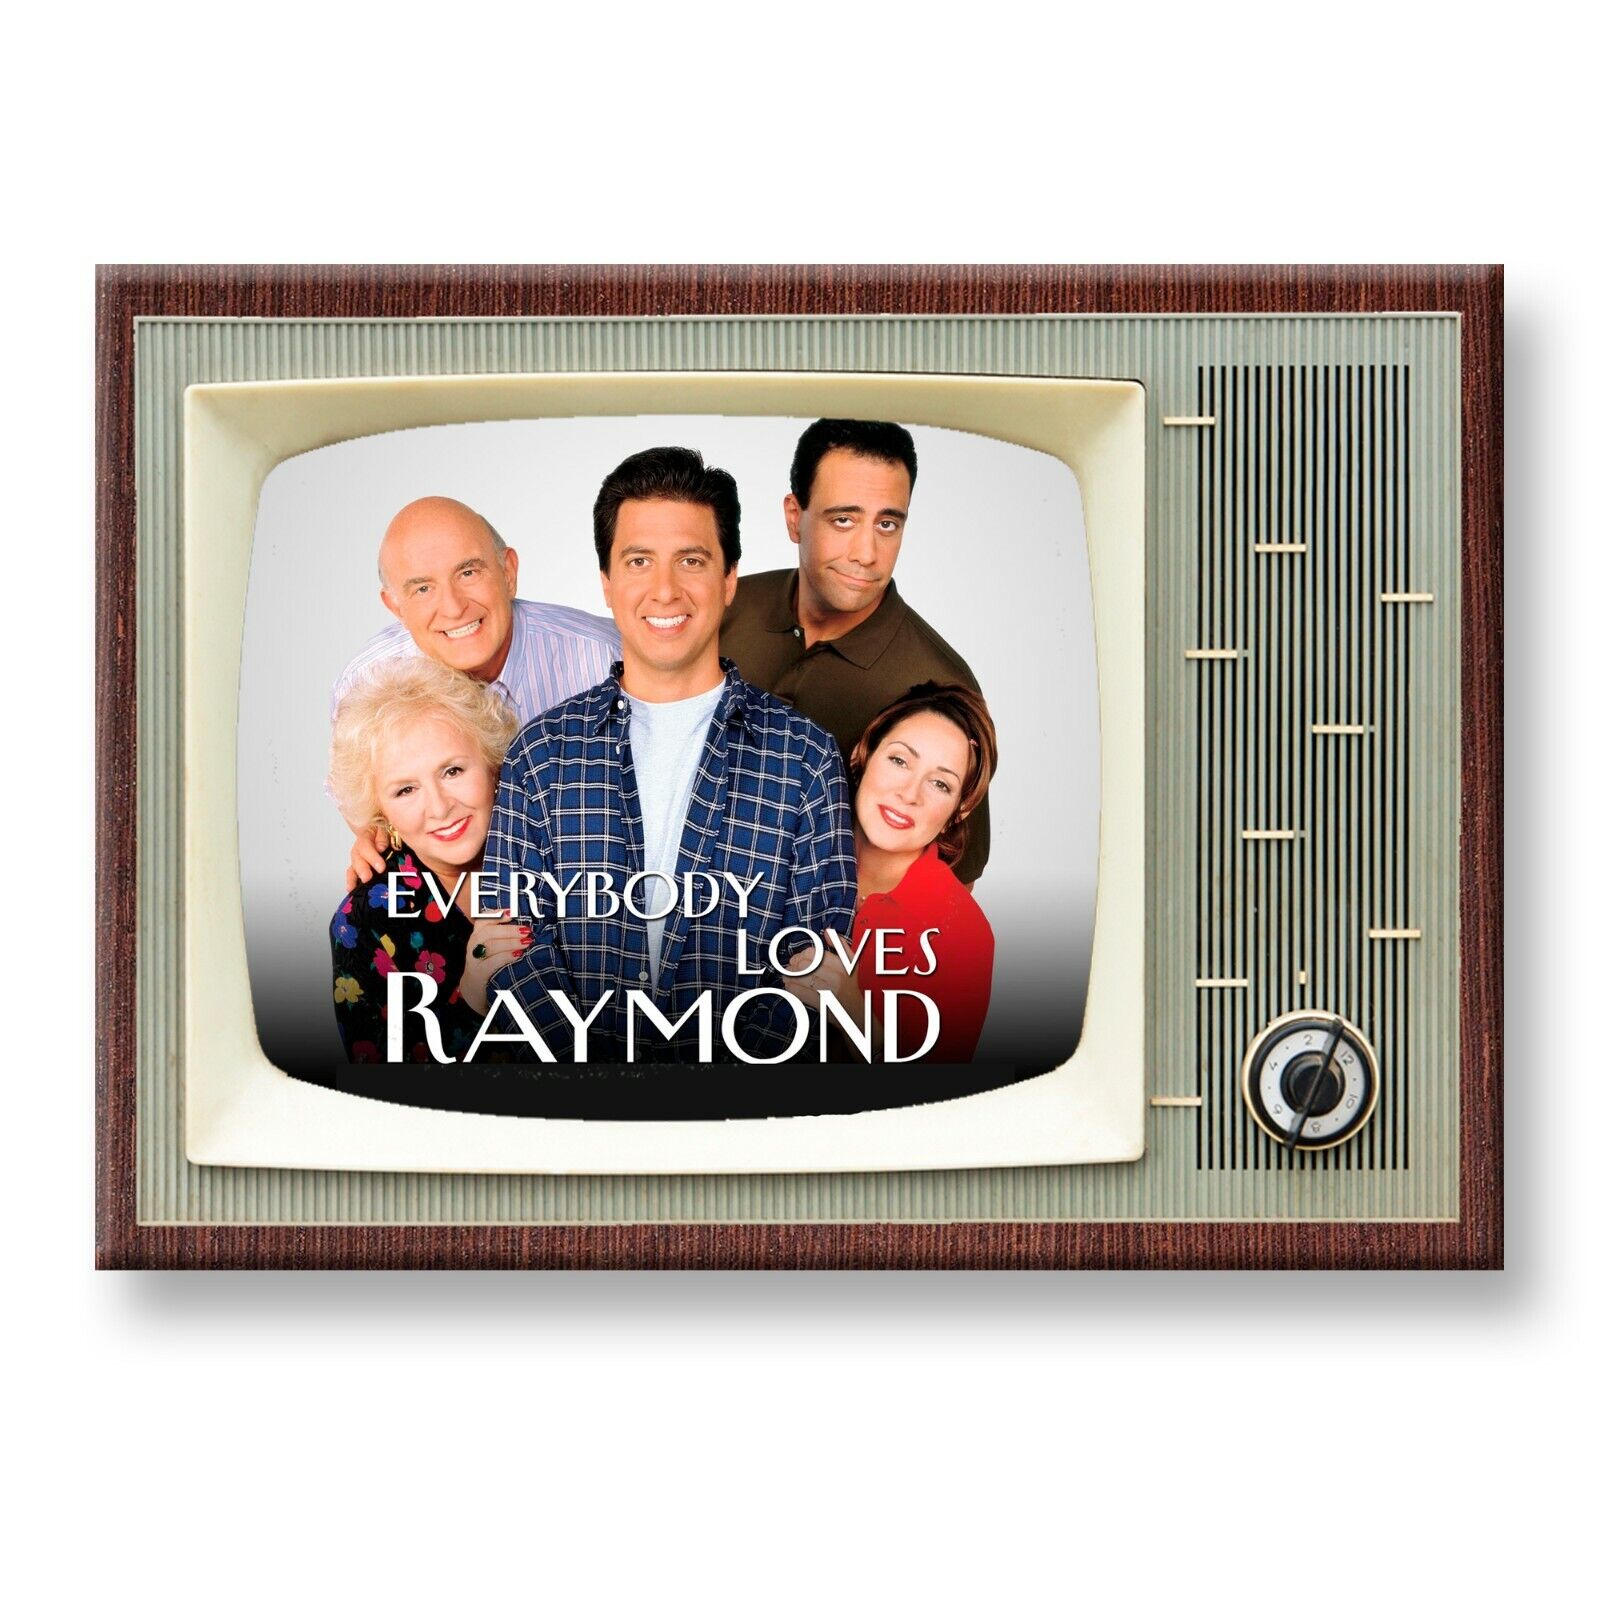 EVERYBODY LOVES RAYMOND TV Show Classic TV 3.5 inches x 2.5 inches FRIDGE MAGNET